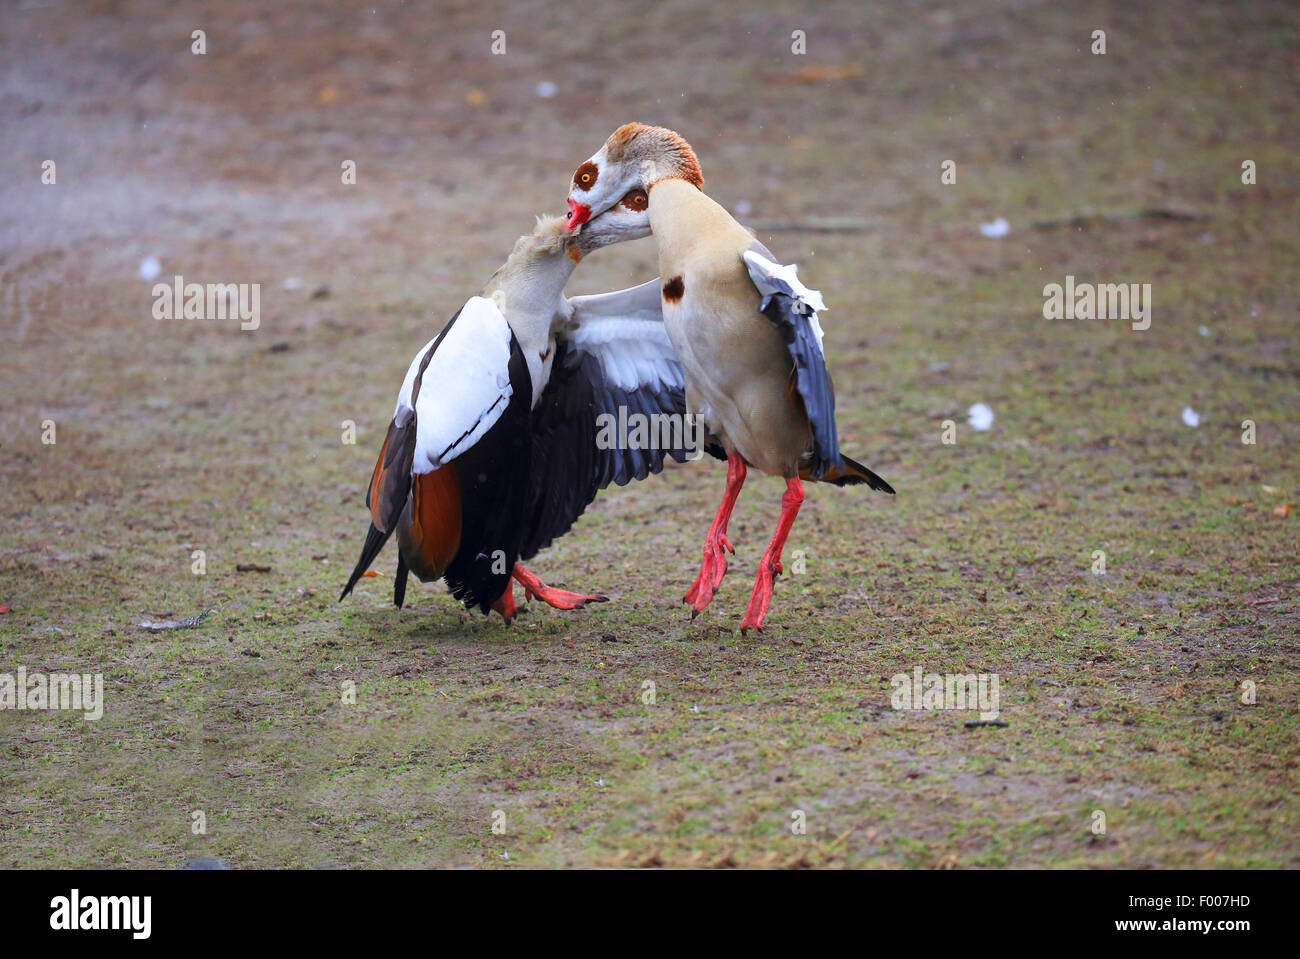 Egyptian goose (Alopochen aegyptiacus), two Egyptian geese conflicting, Germany Stock Photo